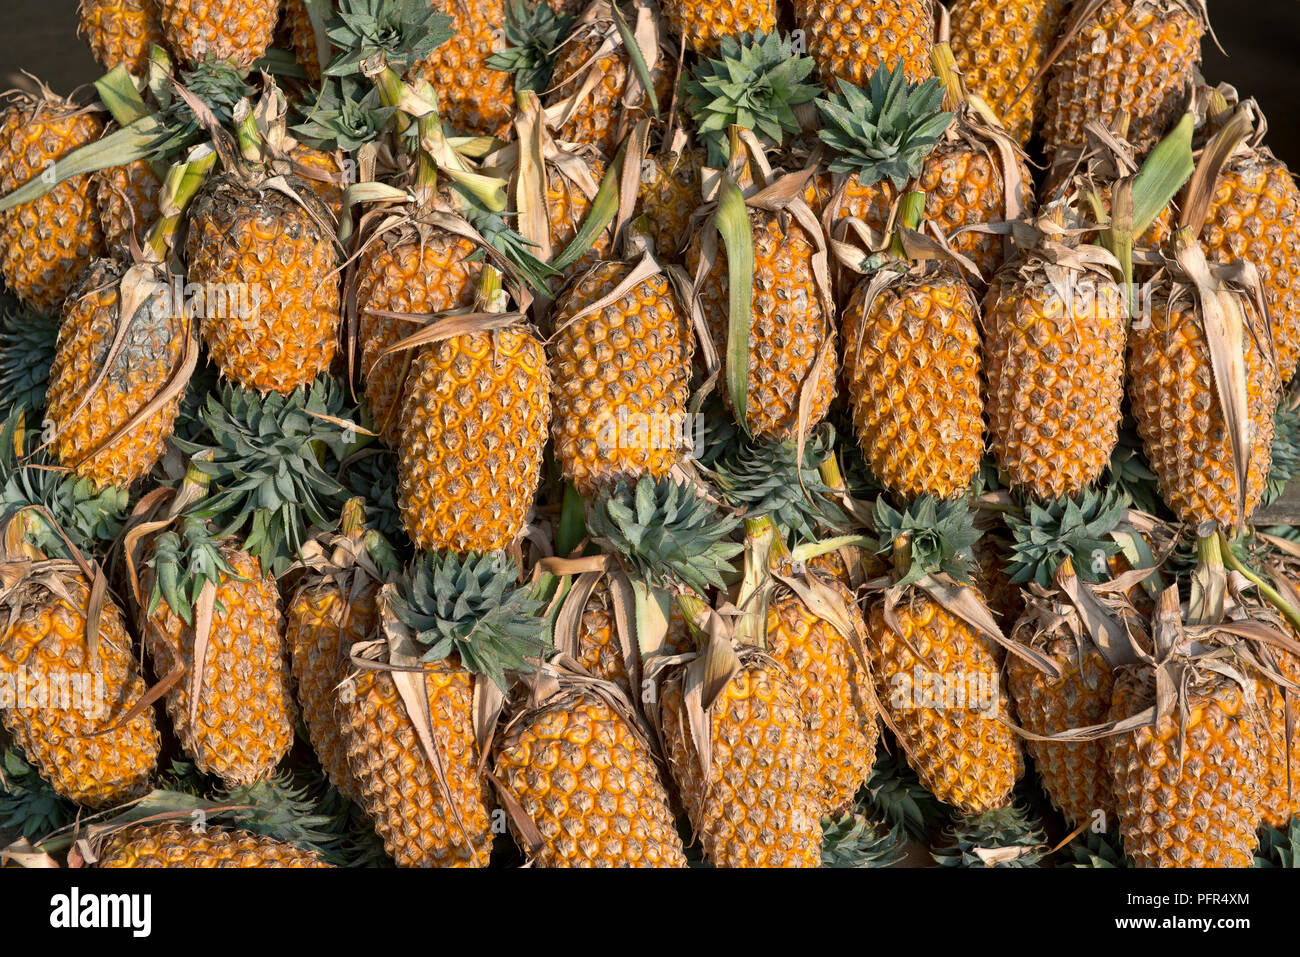 Sri Lanka, pineapples for sale in market, close-up Stock Photo